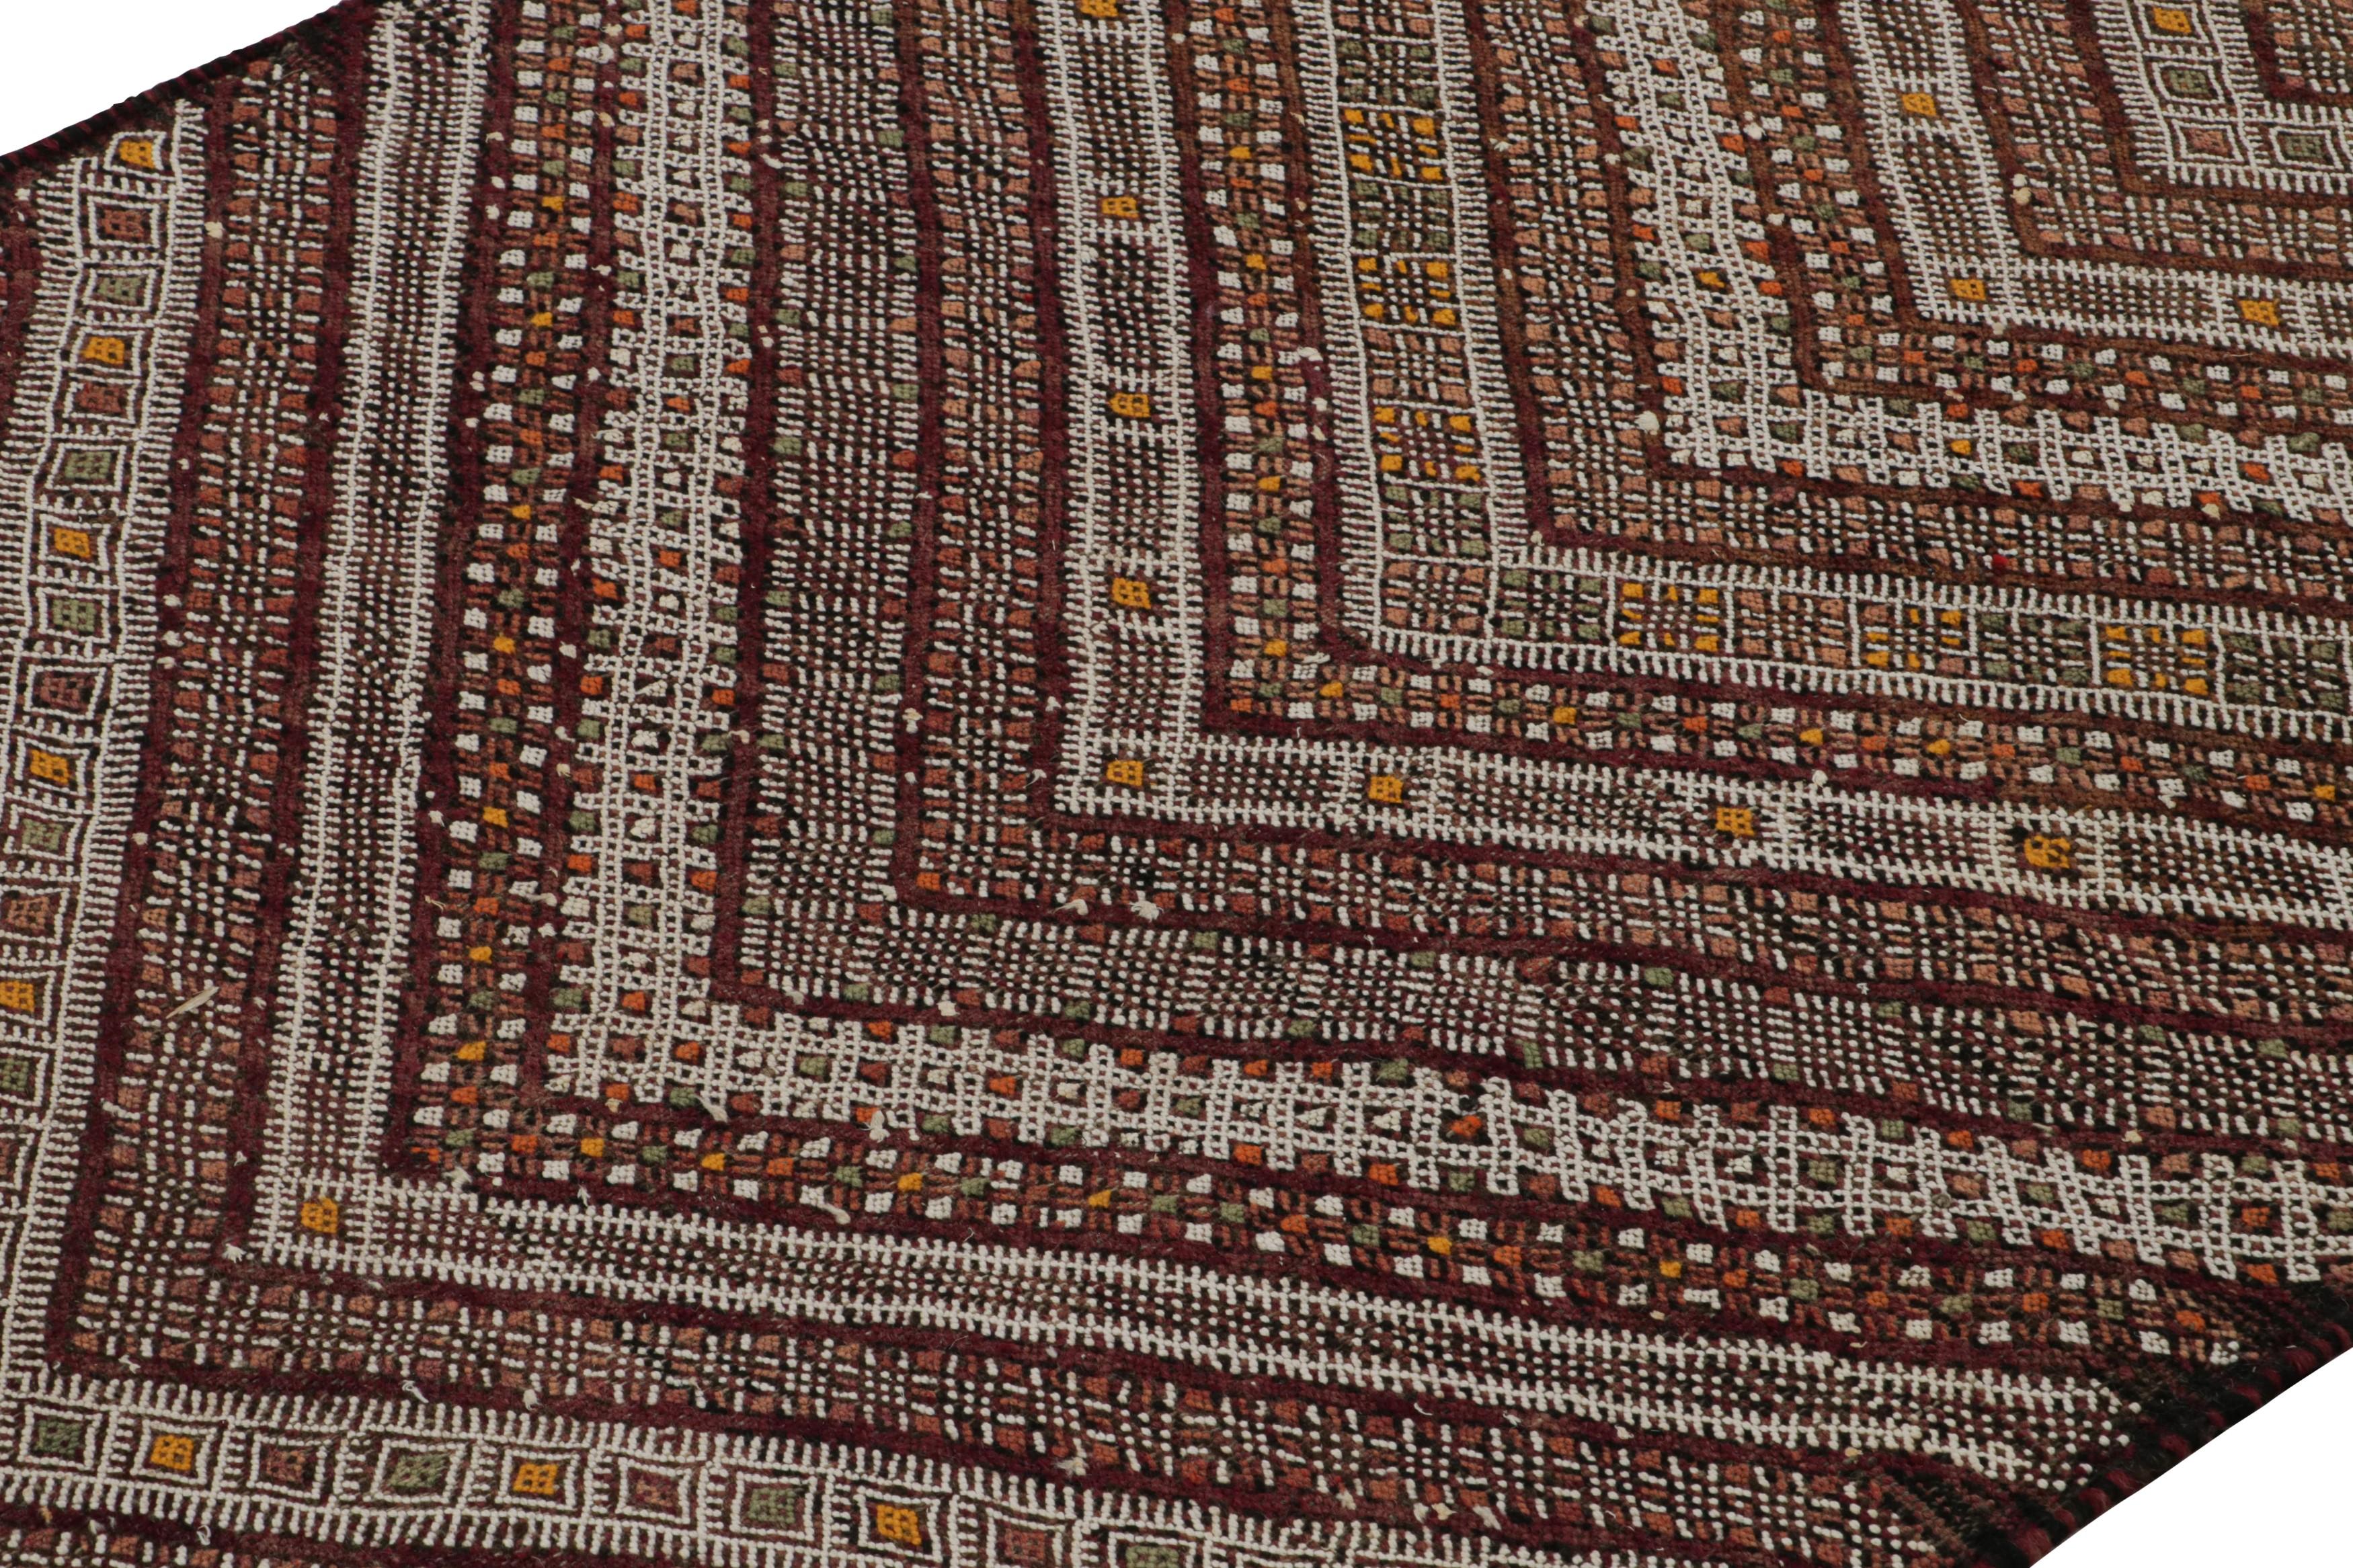 Hand-Woven Vintage Zayane Moroccan Kilim and extra-long Runner Rug, from Rug & Kilim For Sale